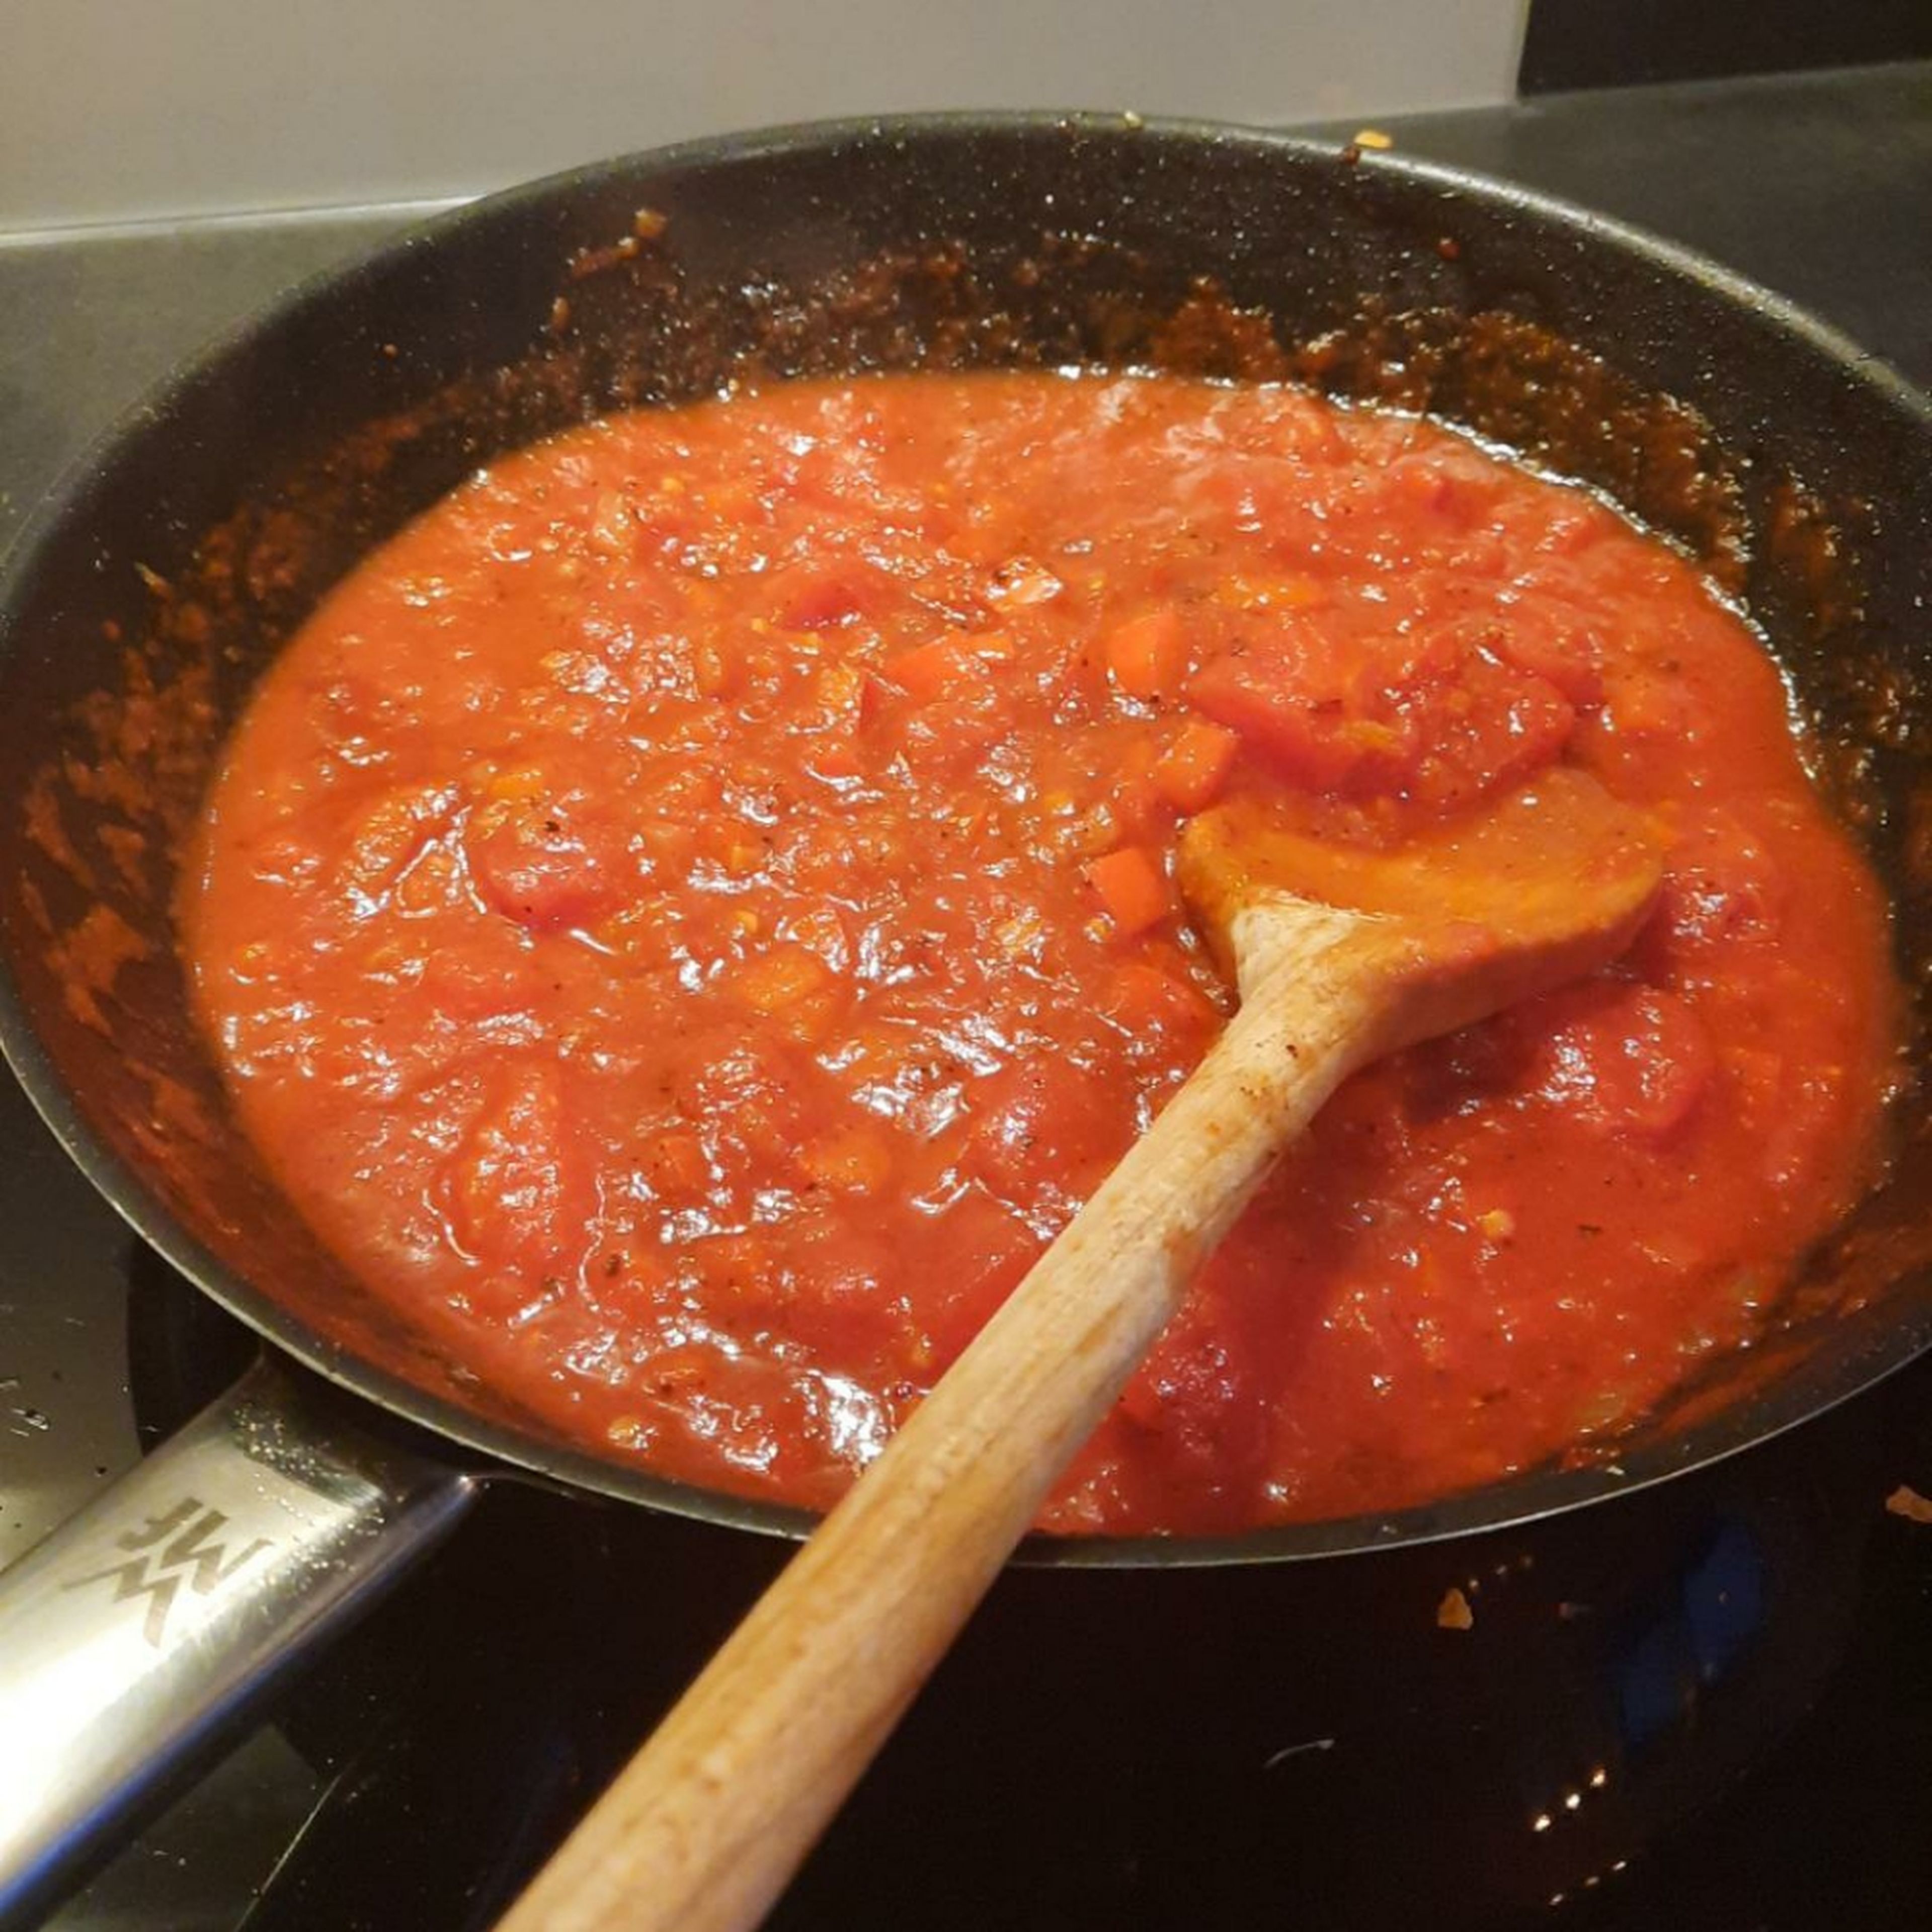 Add tomato paste and sugar into the pan and keep sautéing, approx. 2 min. Deglaze with red wine. Add crushed tomatoes and simmer for approx. 7 – 10 min. Season to taste with salt, pepper, and chili powder.